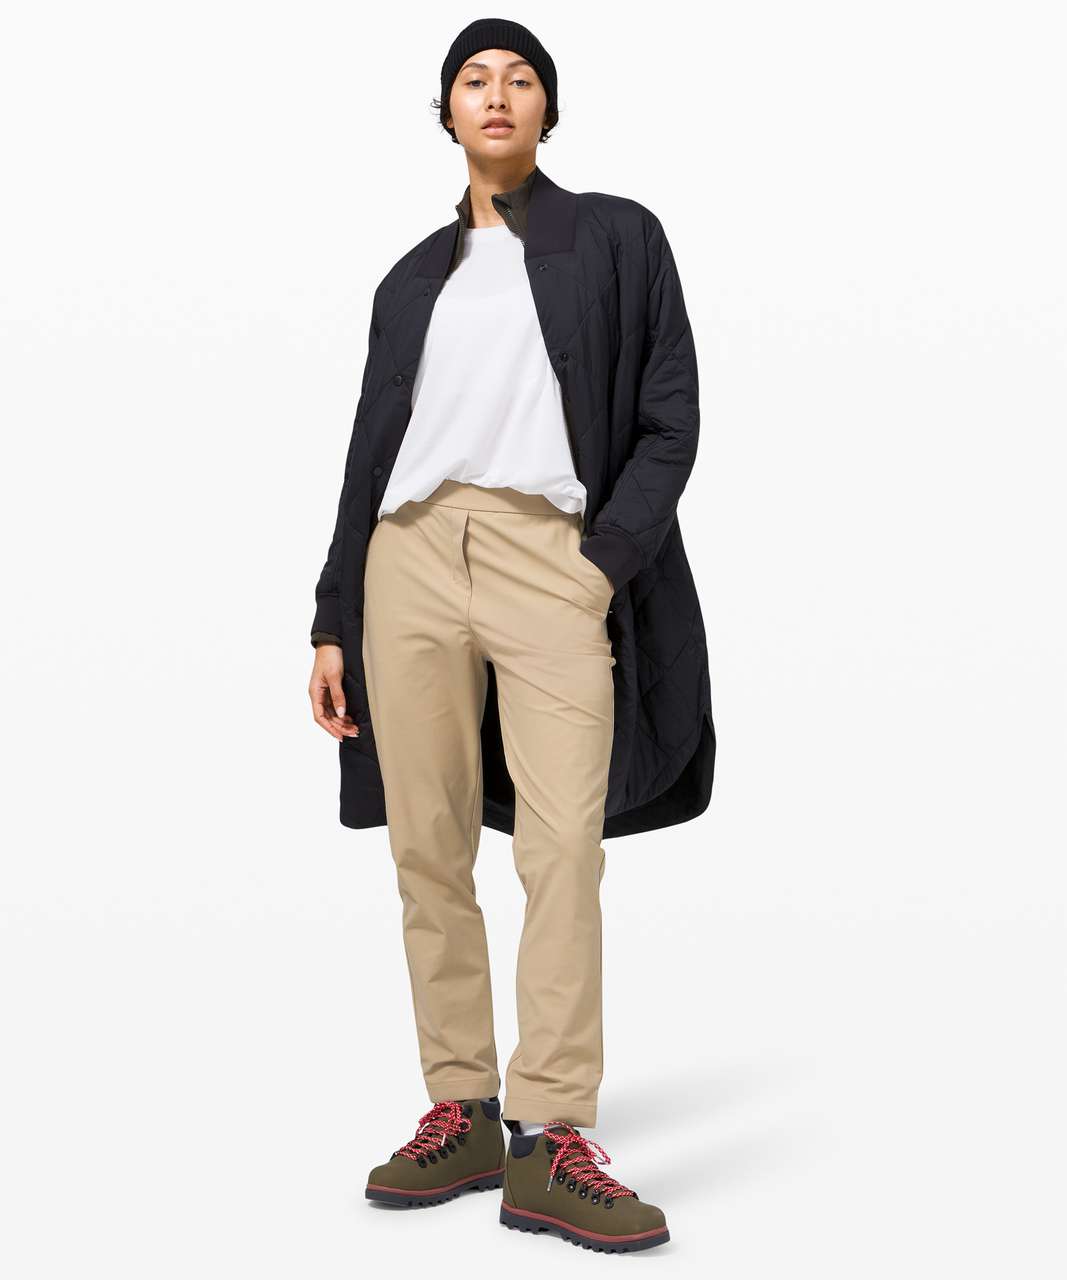 Lululemon Your True Trouser 7/8 Pant - Trench